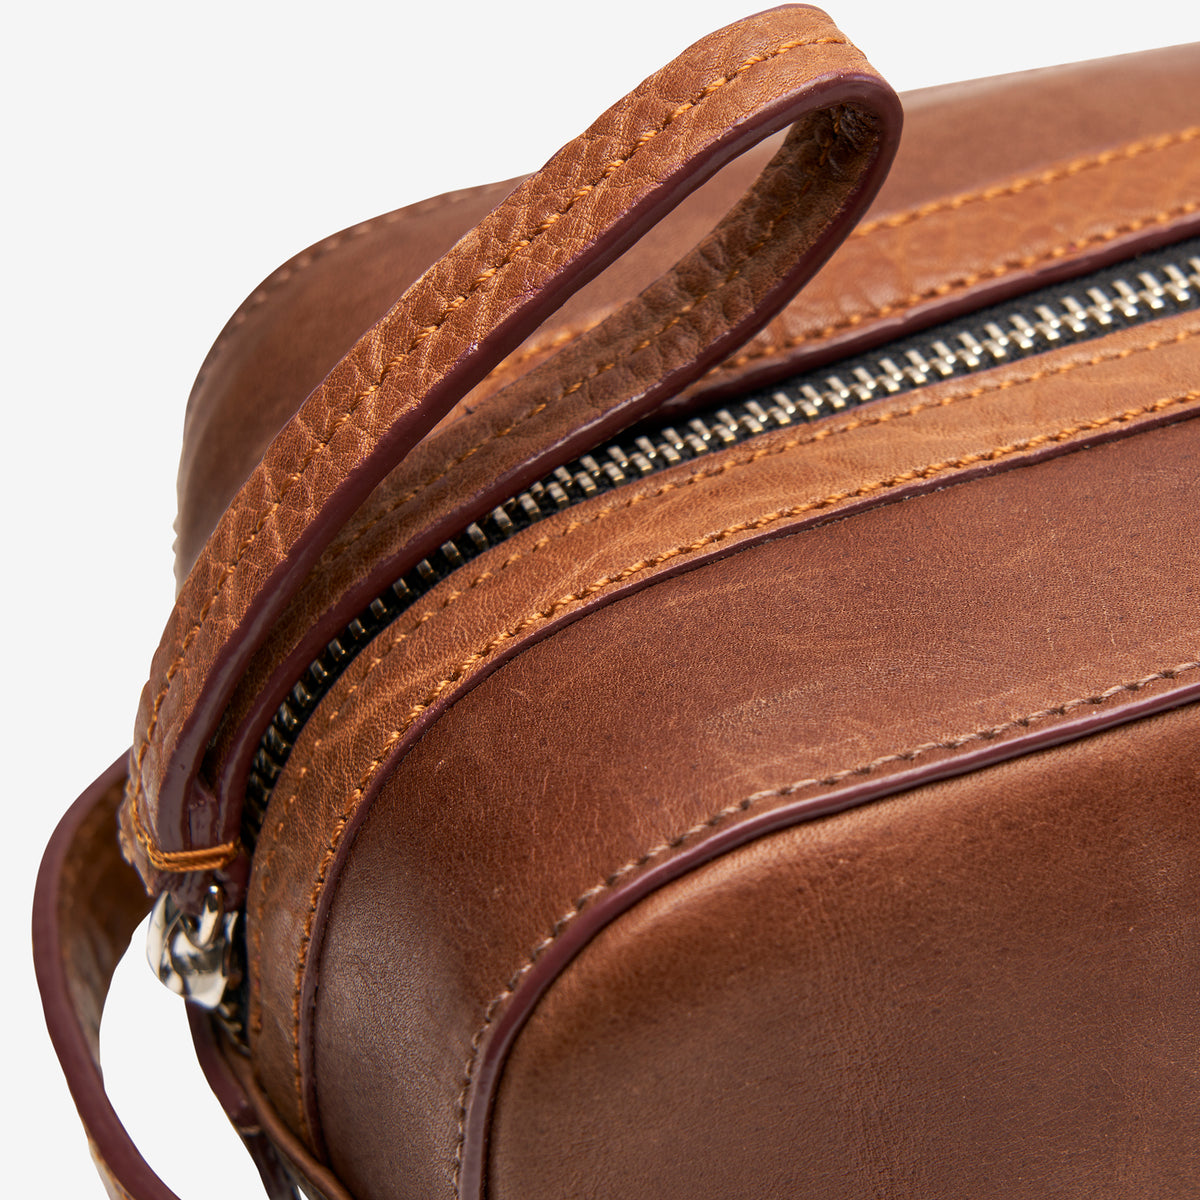     tusk-770-mens-leather-toiletry-case-chocolate-detail-1